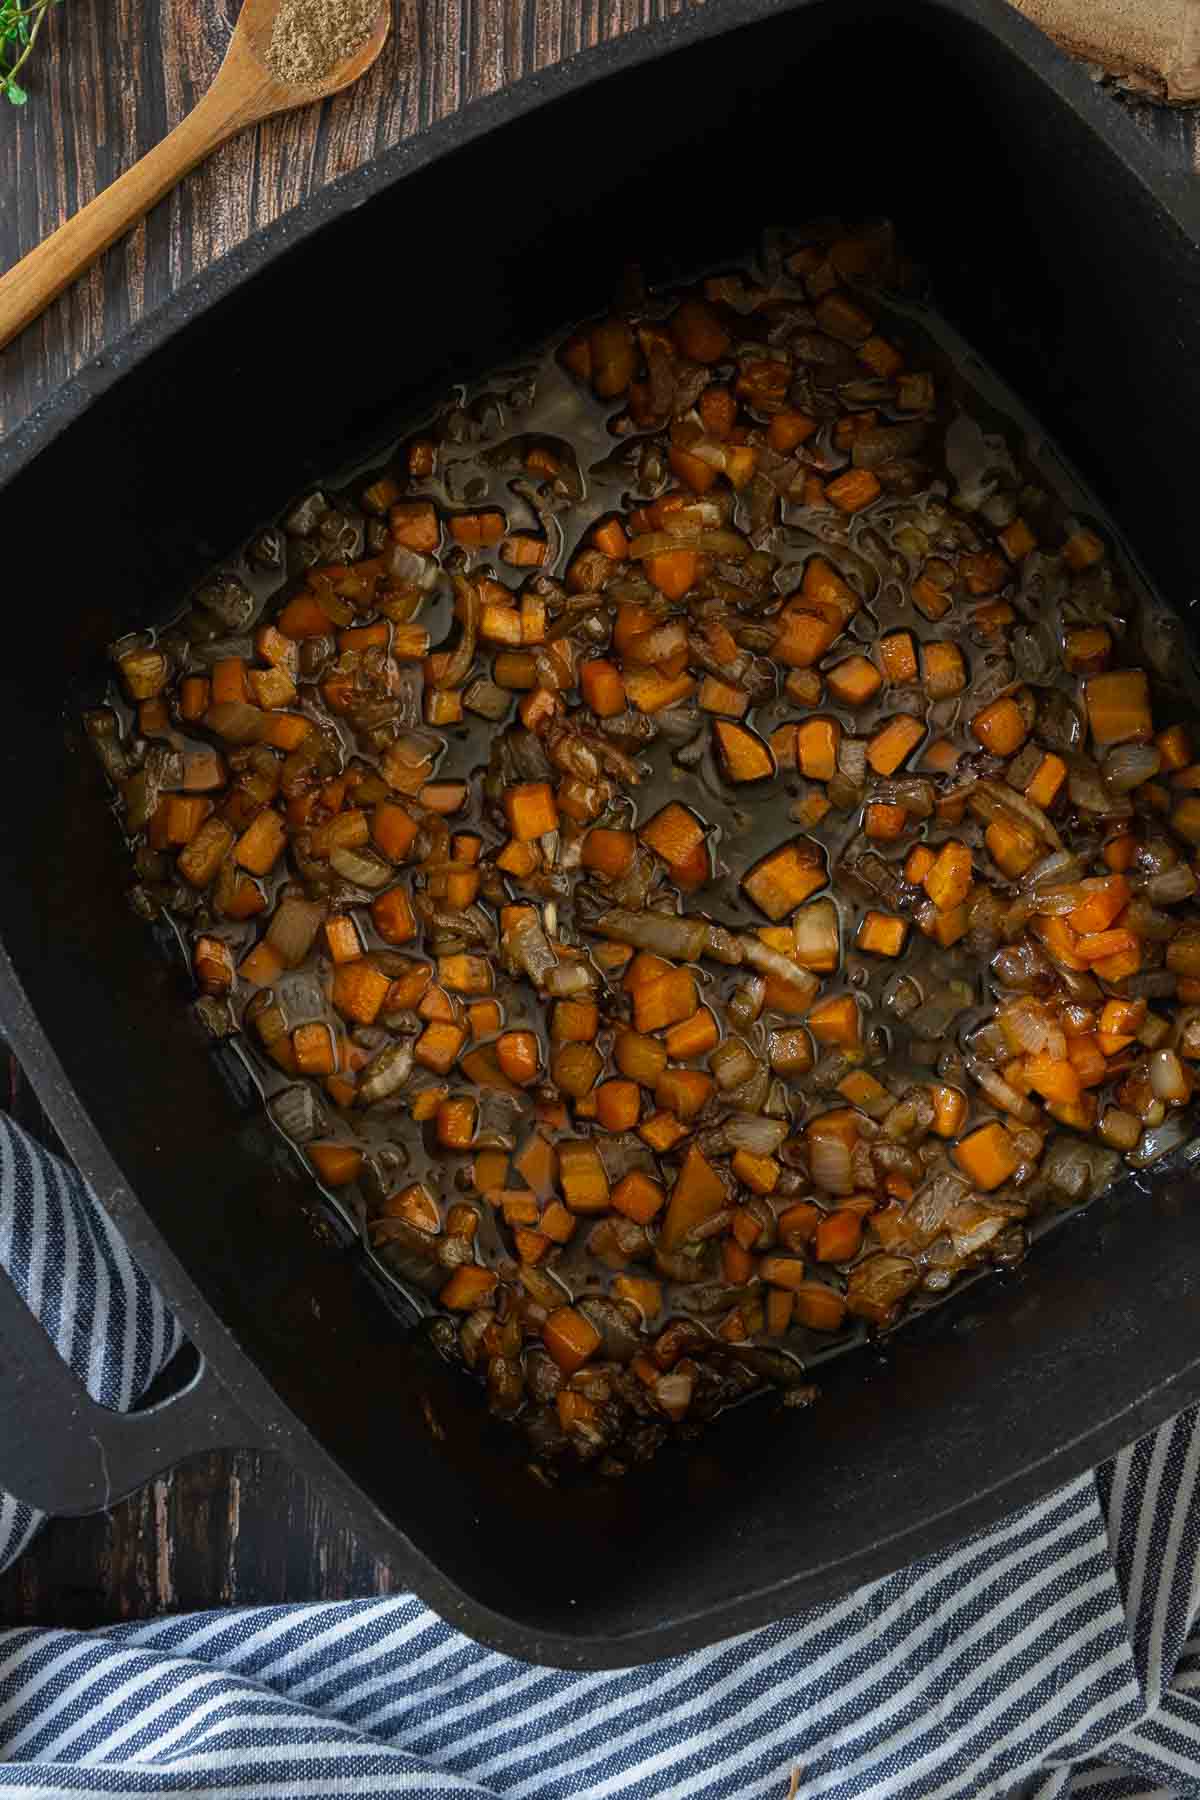 Vegetables and aromatics being browned in a heavy black cast iron pot.